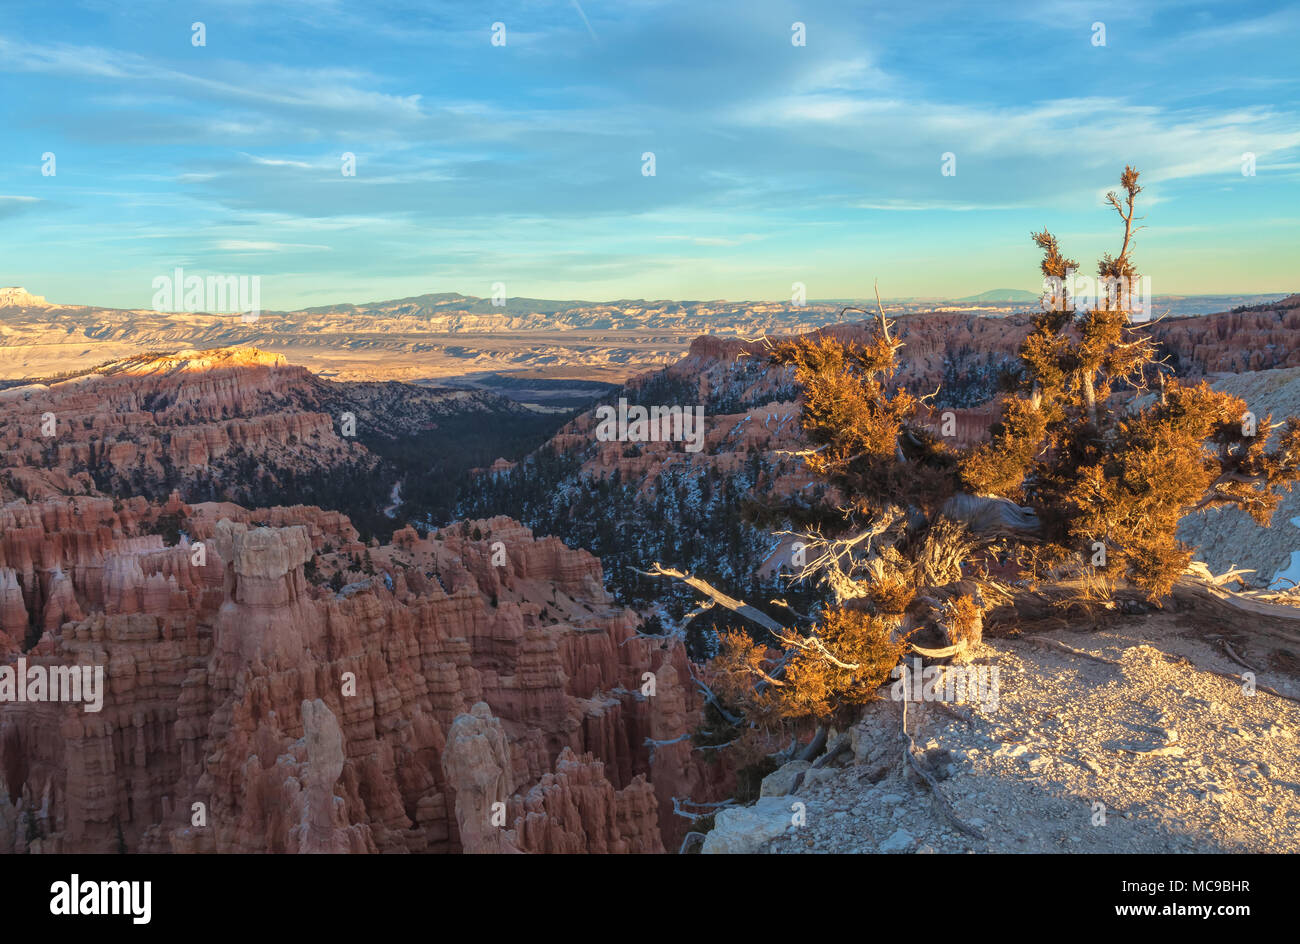 Bristlecone pine (Pinus longaeva) and the Bryce Canyon on a winter evening, Bryce Canyon National Park, Utah, United States. Stock Photo